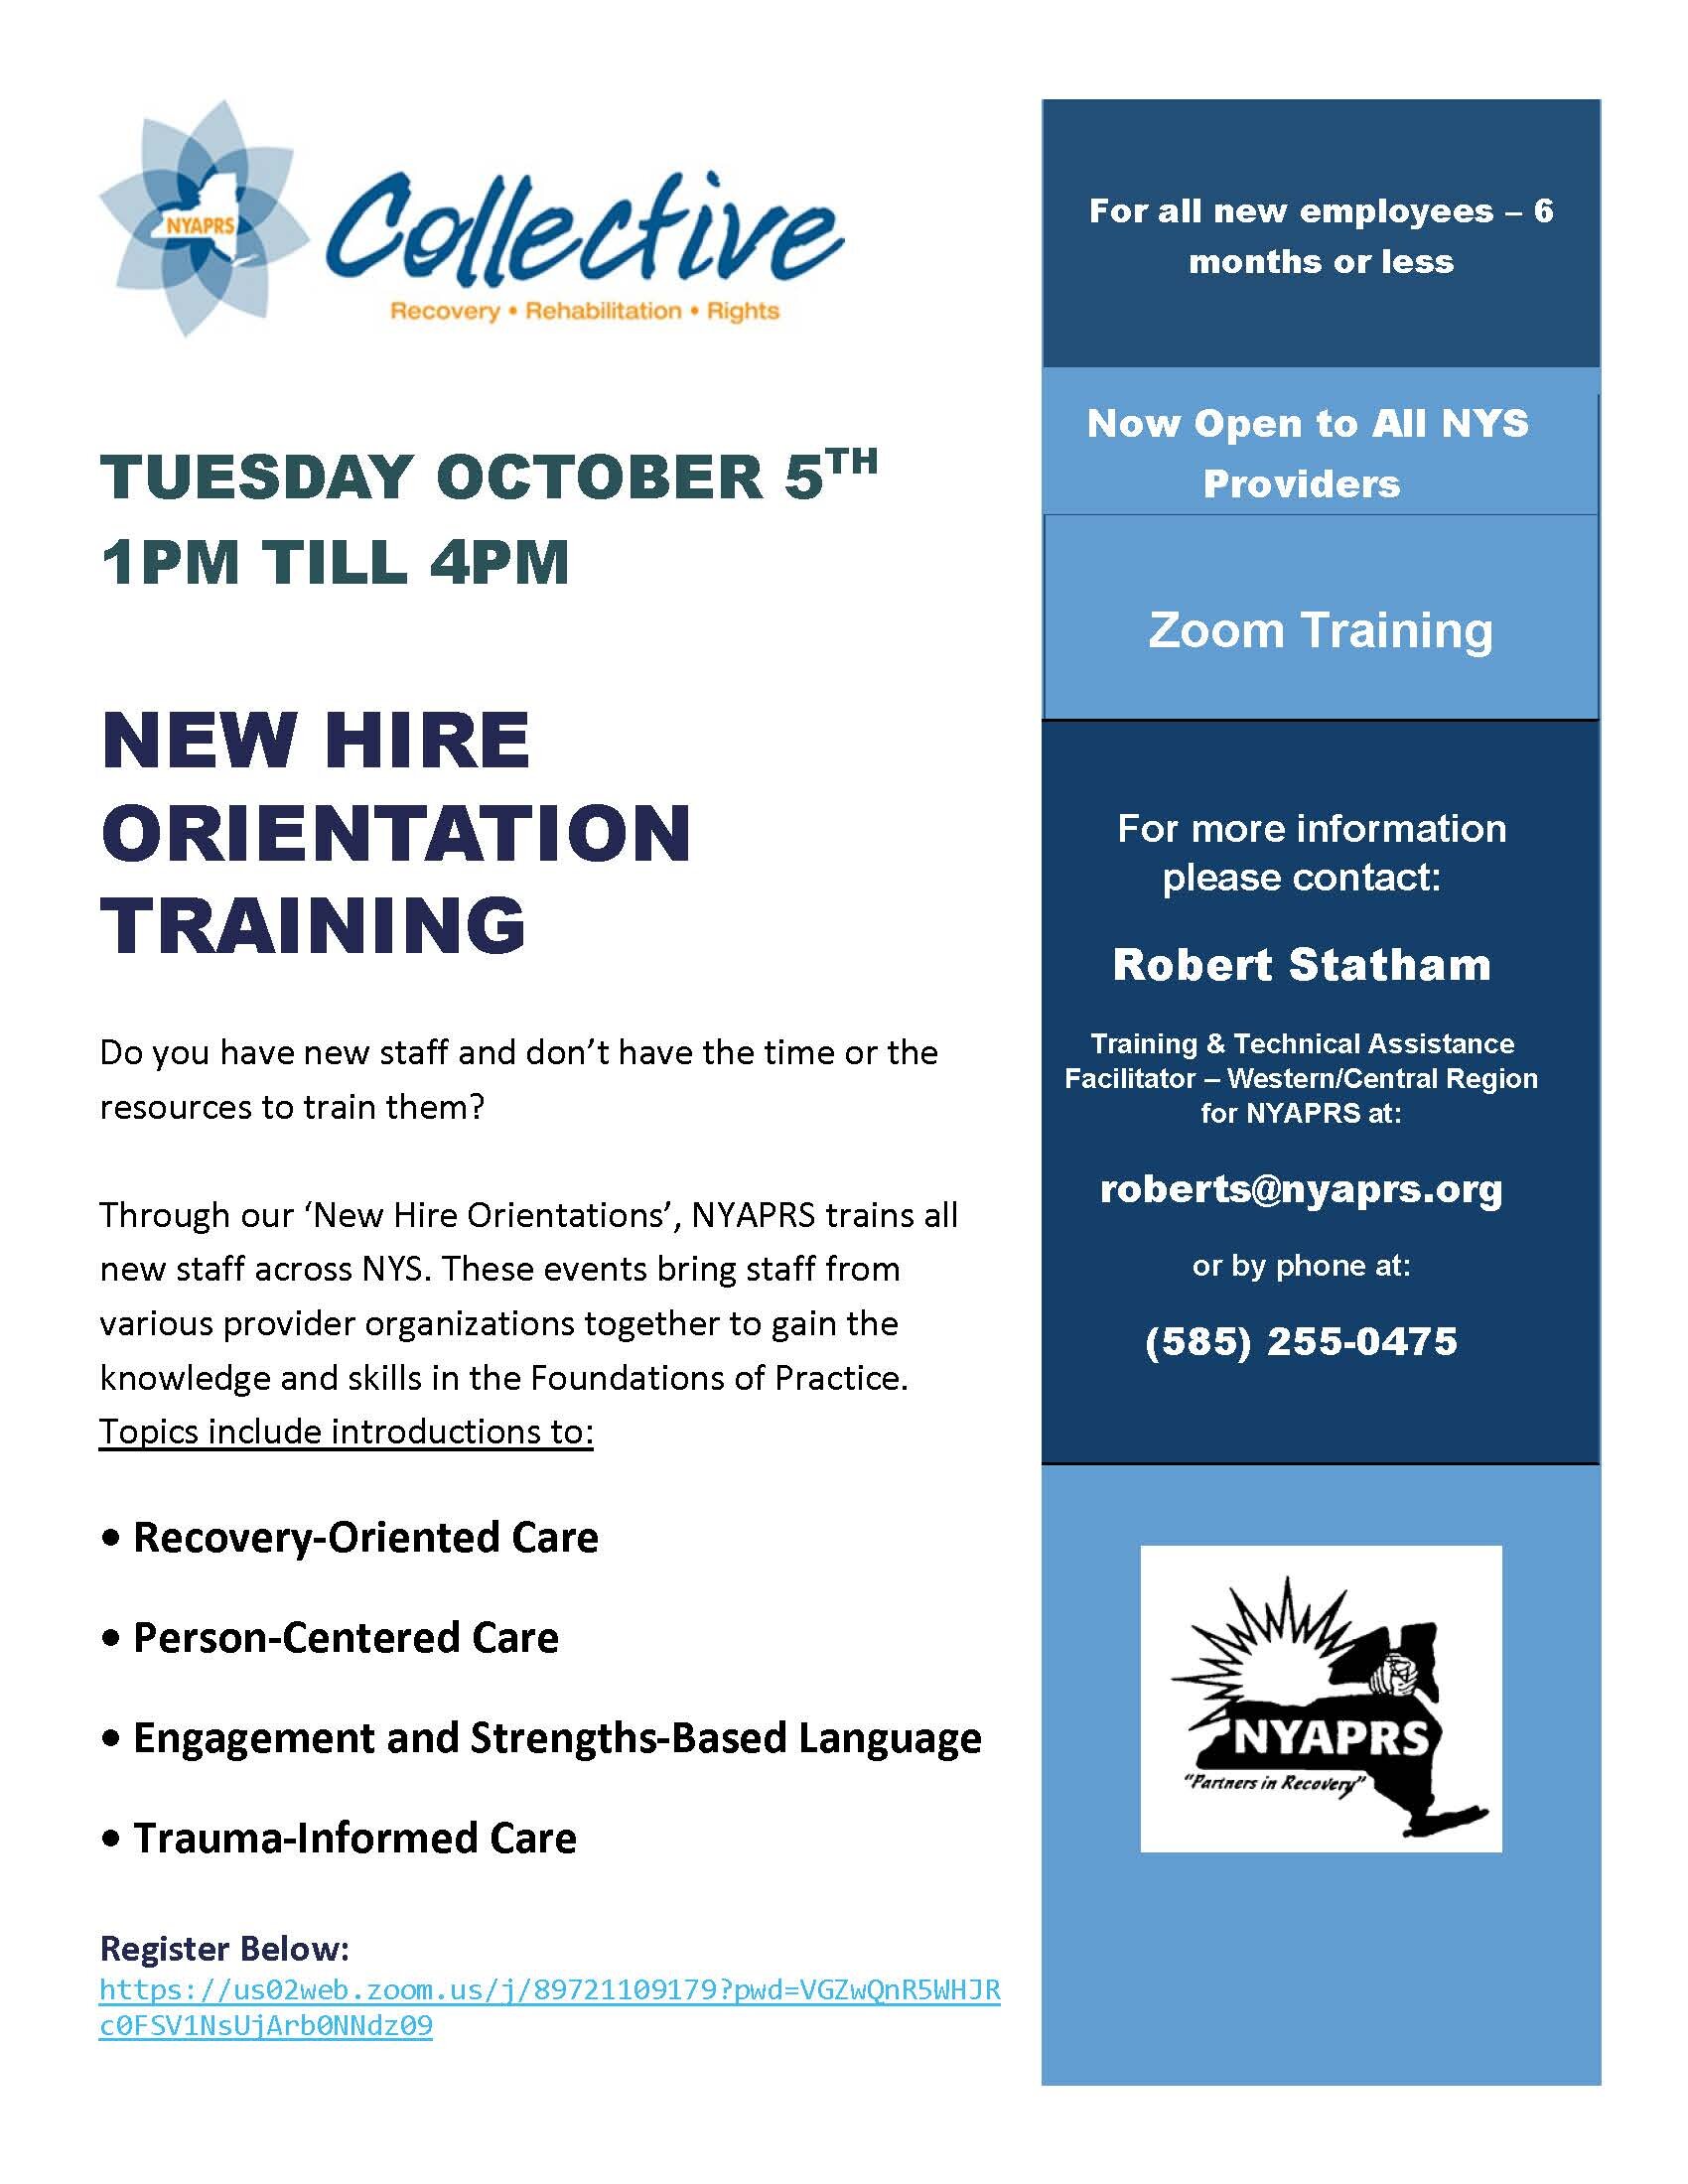 New Hire Orientation Flyer for NYS Oct 2021.jpg